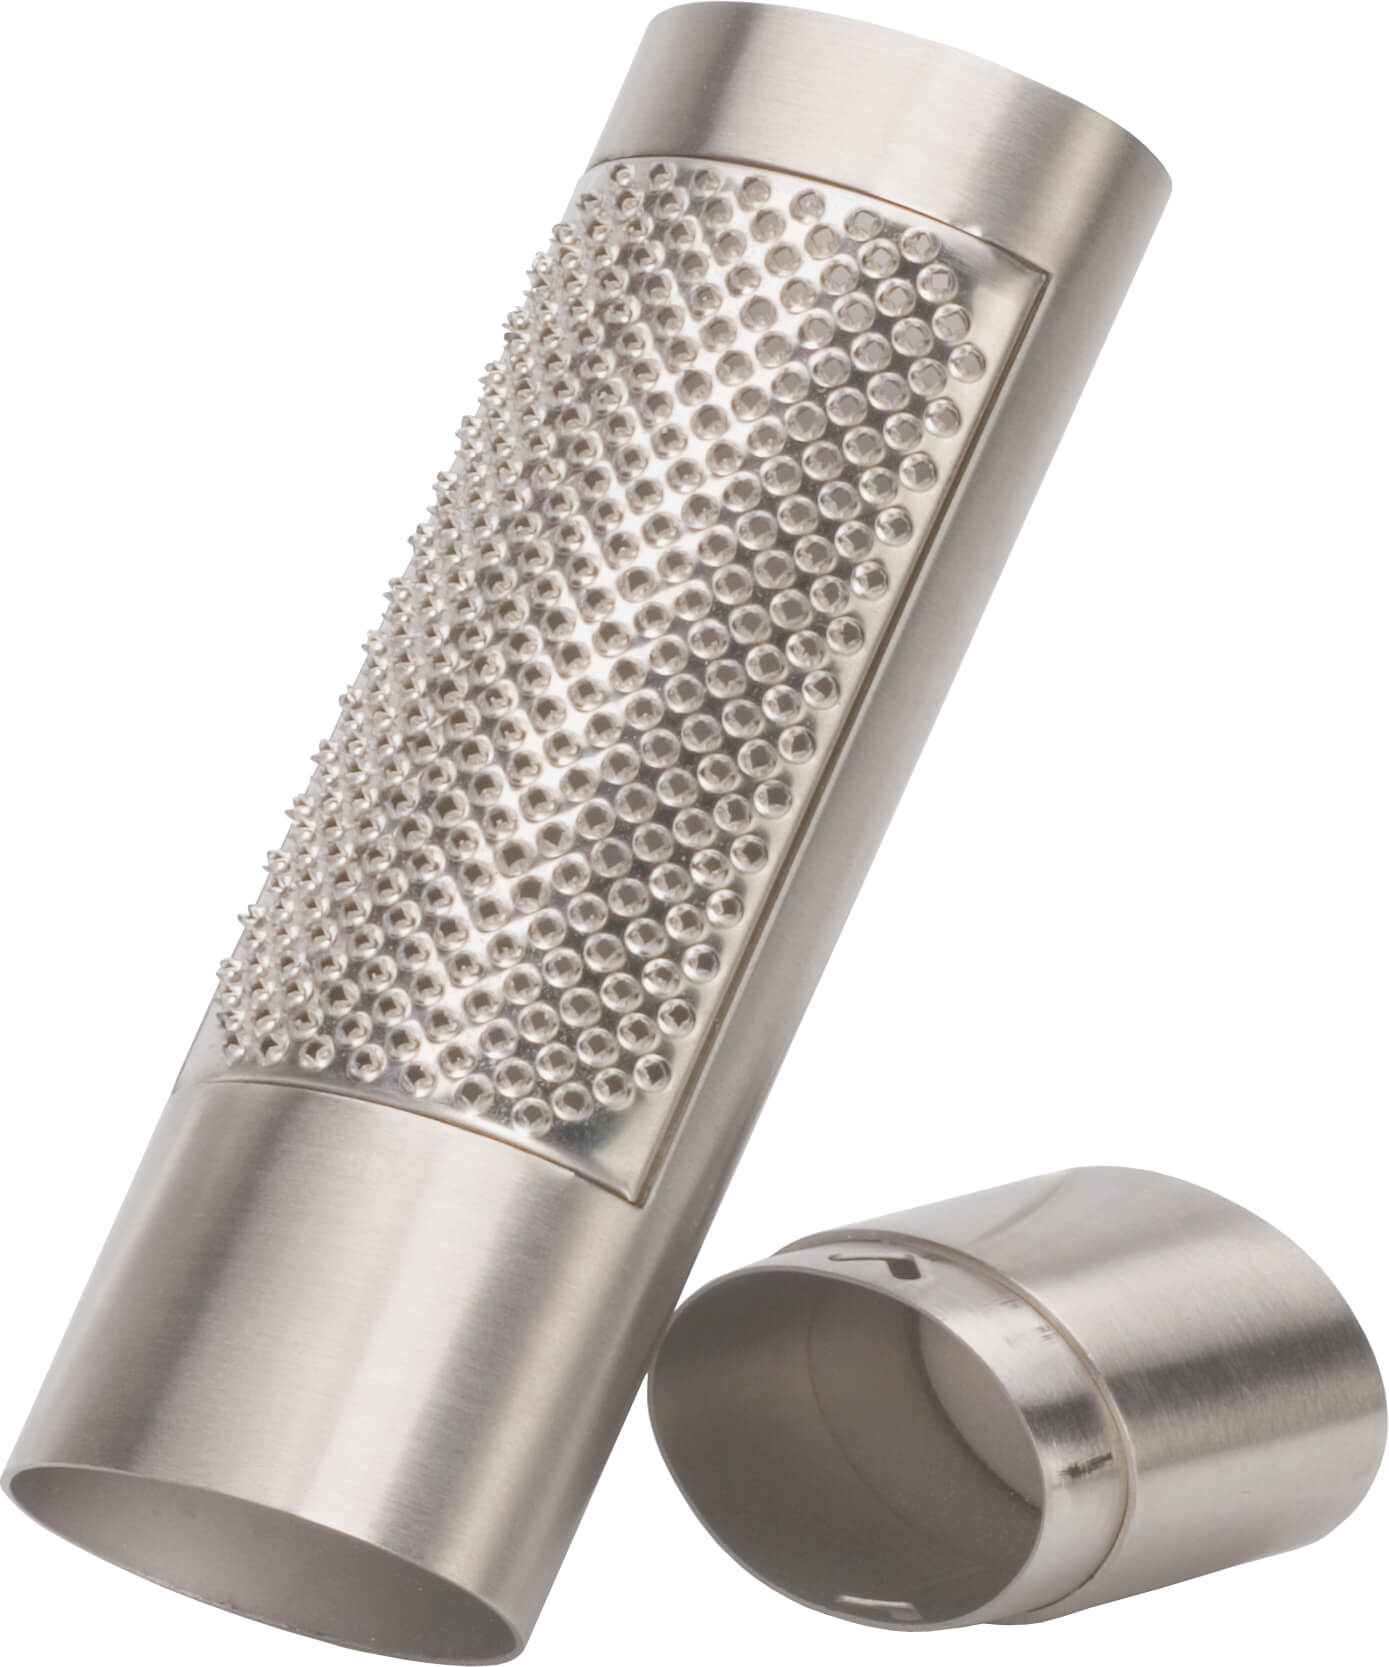 Nutmeg grater with storage compartment - brushed stainless steel